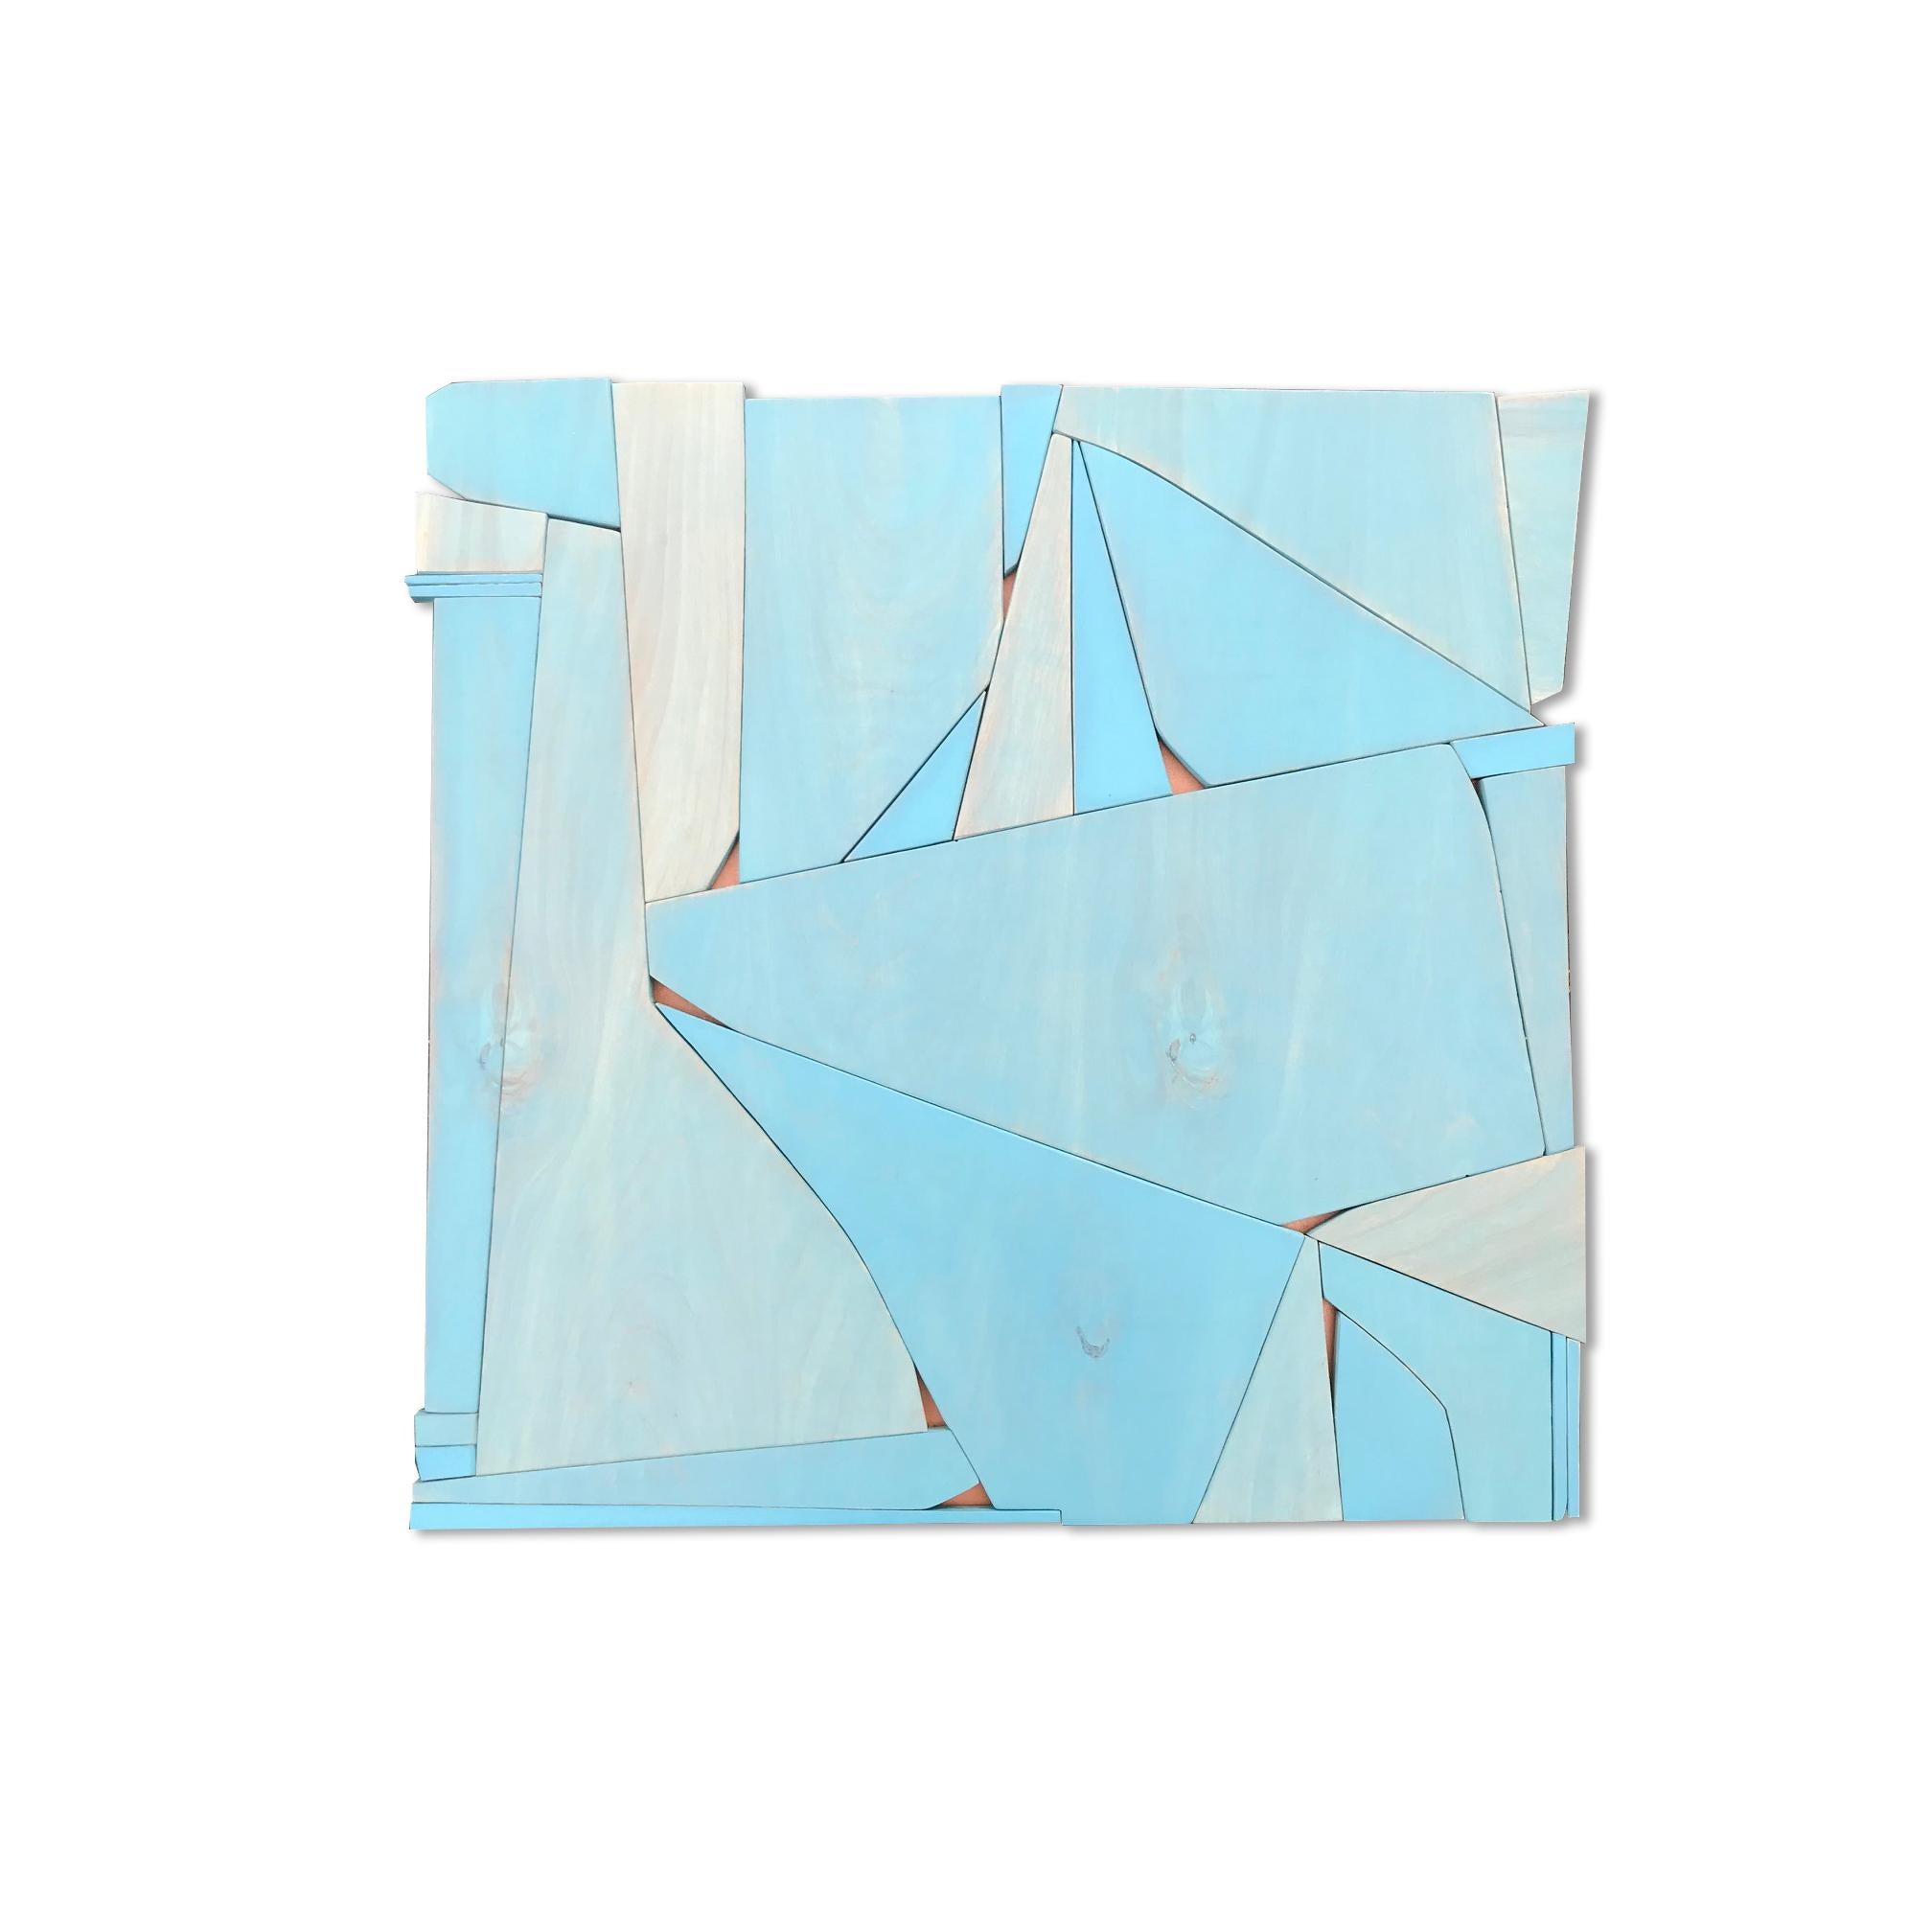 Scott Troxel Abstract Painting - BlueCopper (monochrome light blue wall wood sculpture abstract geometric design